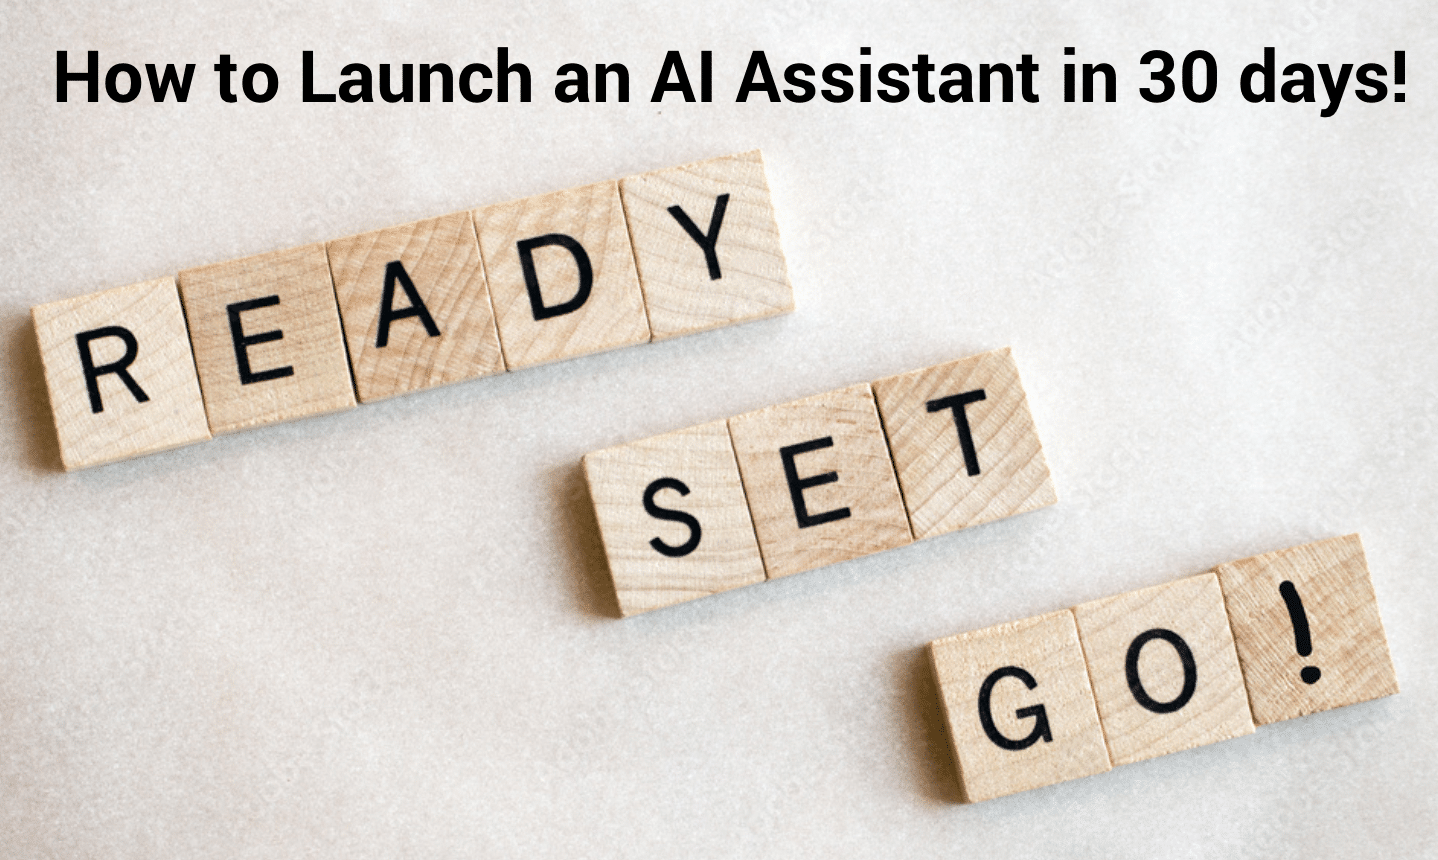 How to launch and AI assistant in 30 days